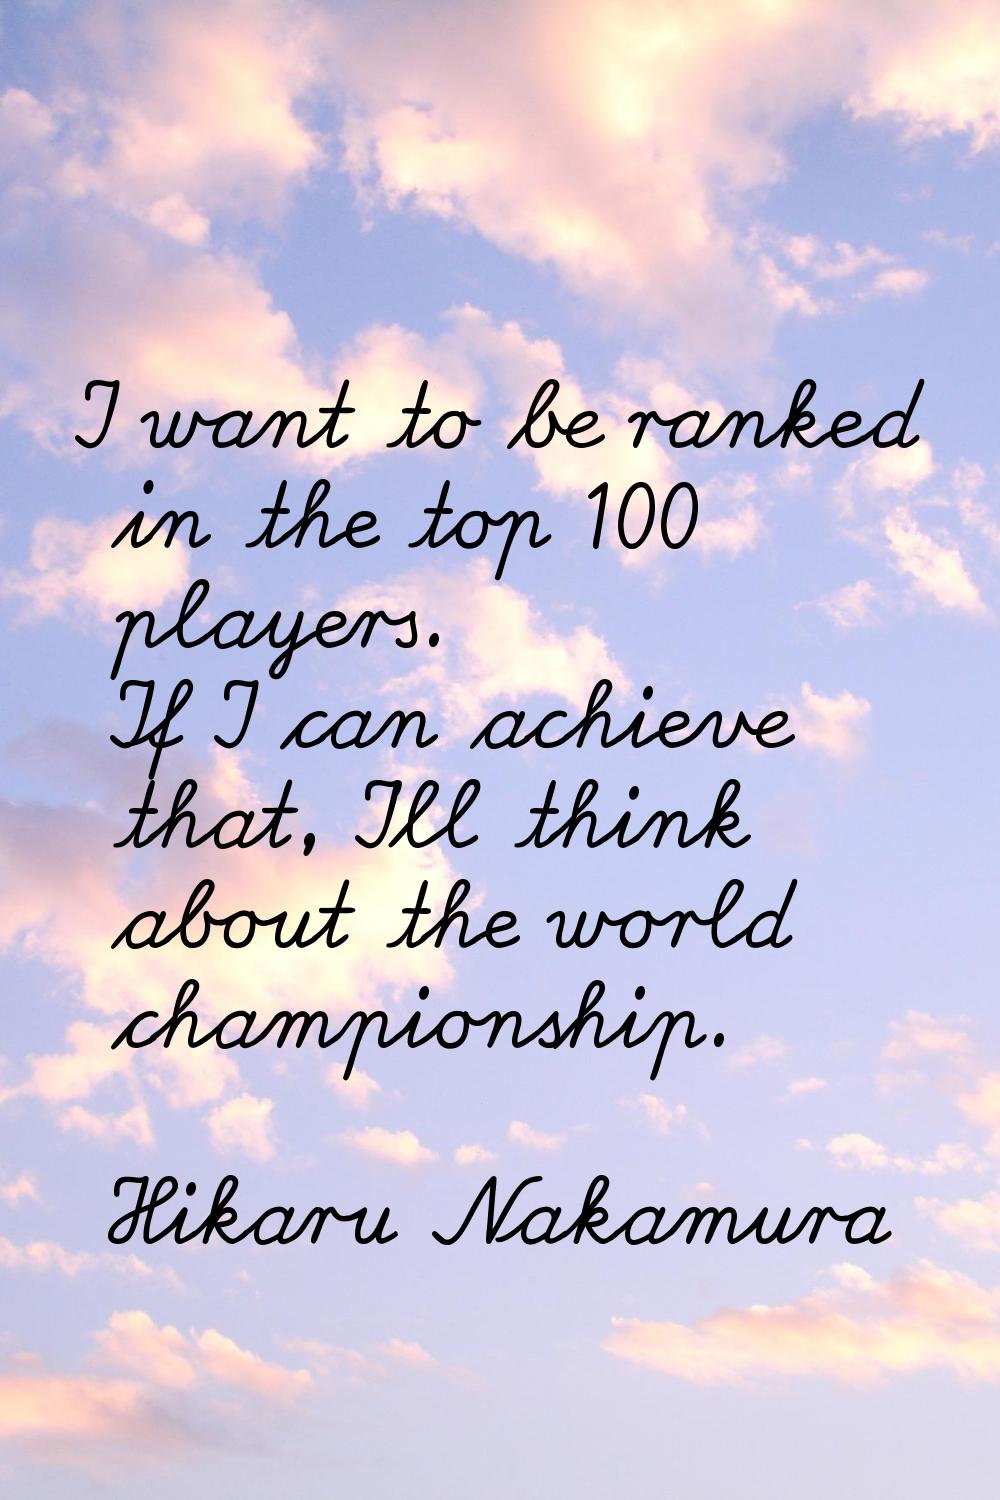 I want to be ranked in the top 100 players. If I can achieve that, I'll think about the world champ